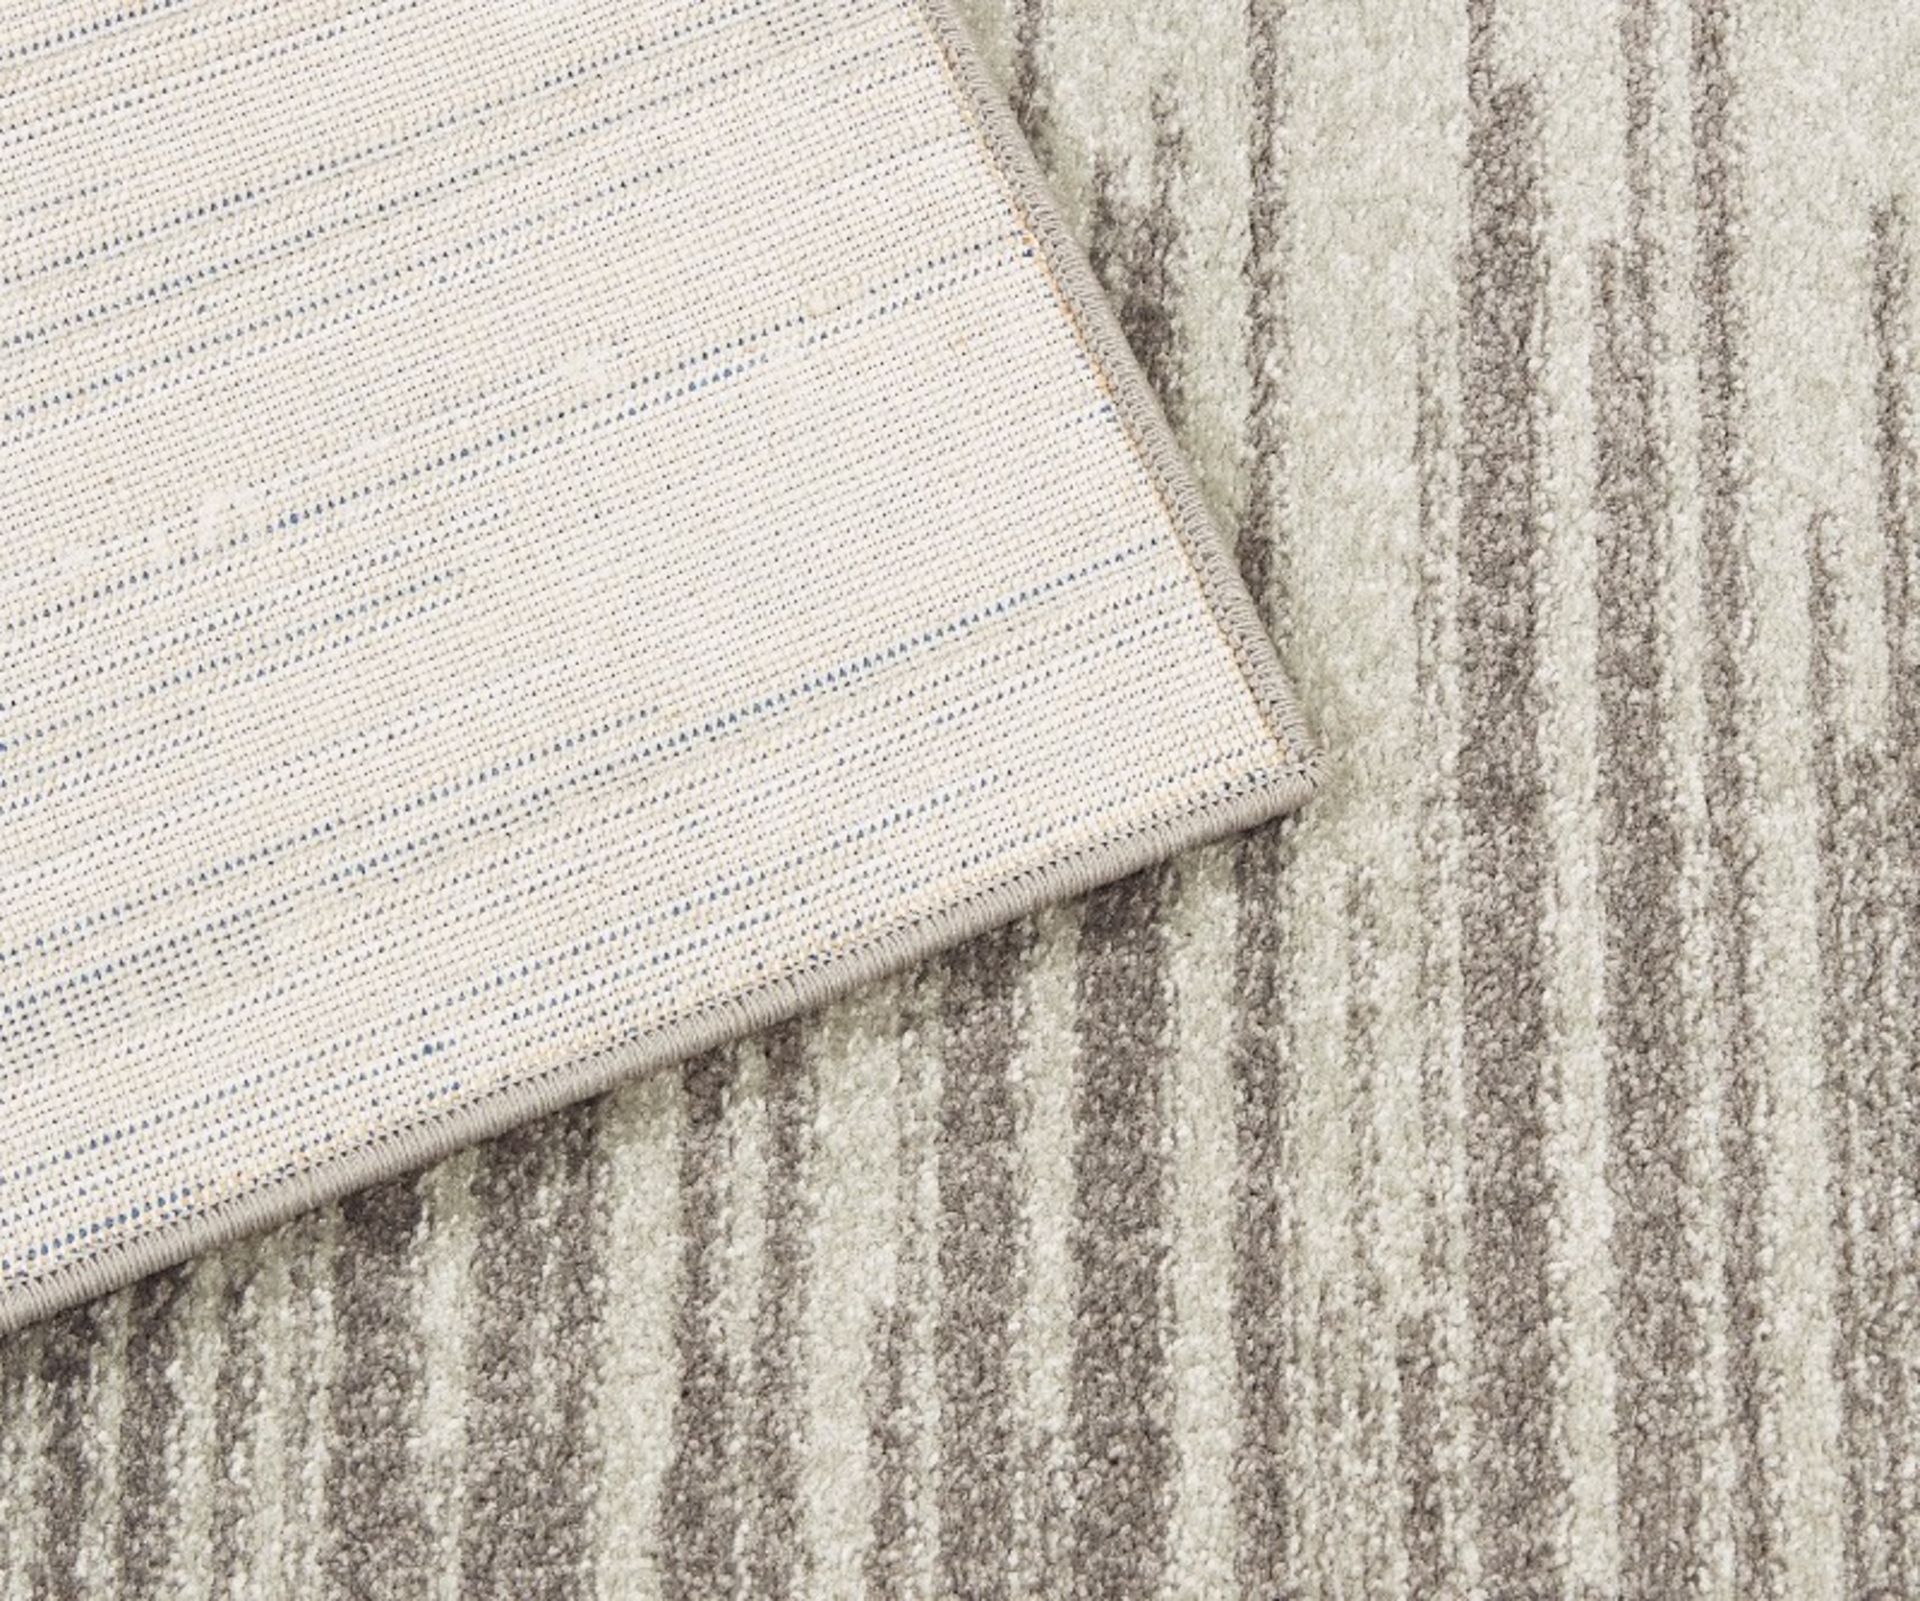 1 x Asiatic Carpets 'NOVA' Rug In Ombre Grey NV13 - Brand New & Sealed - Made In Turkey - - Image 4 of 7